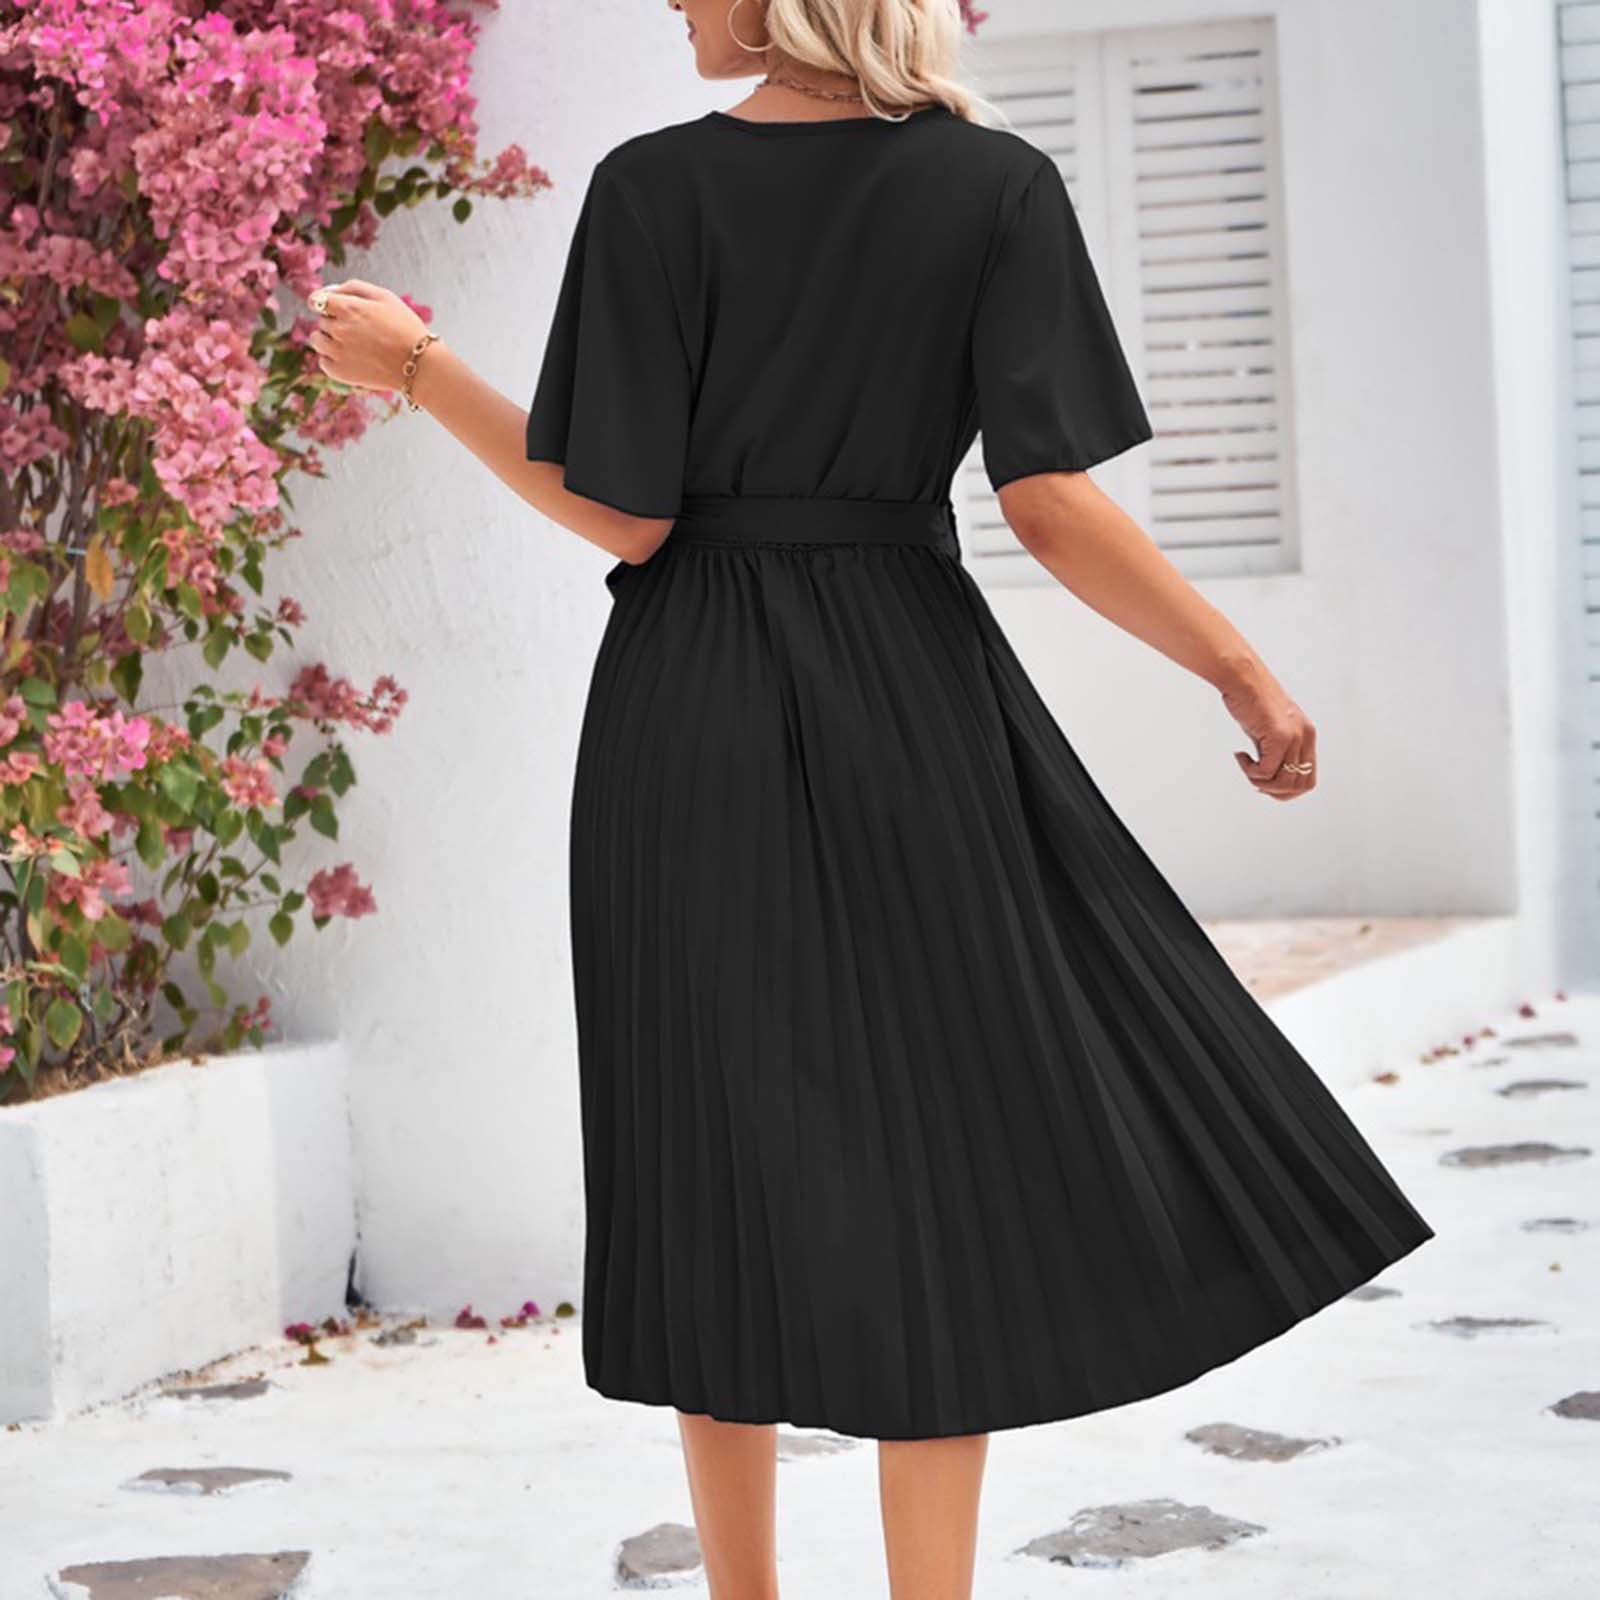 womens black dress for funeral